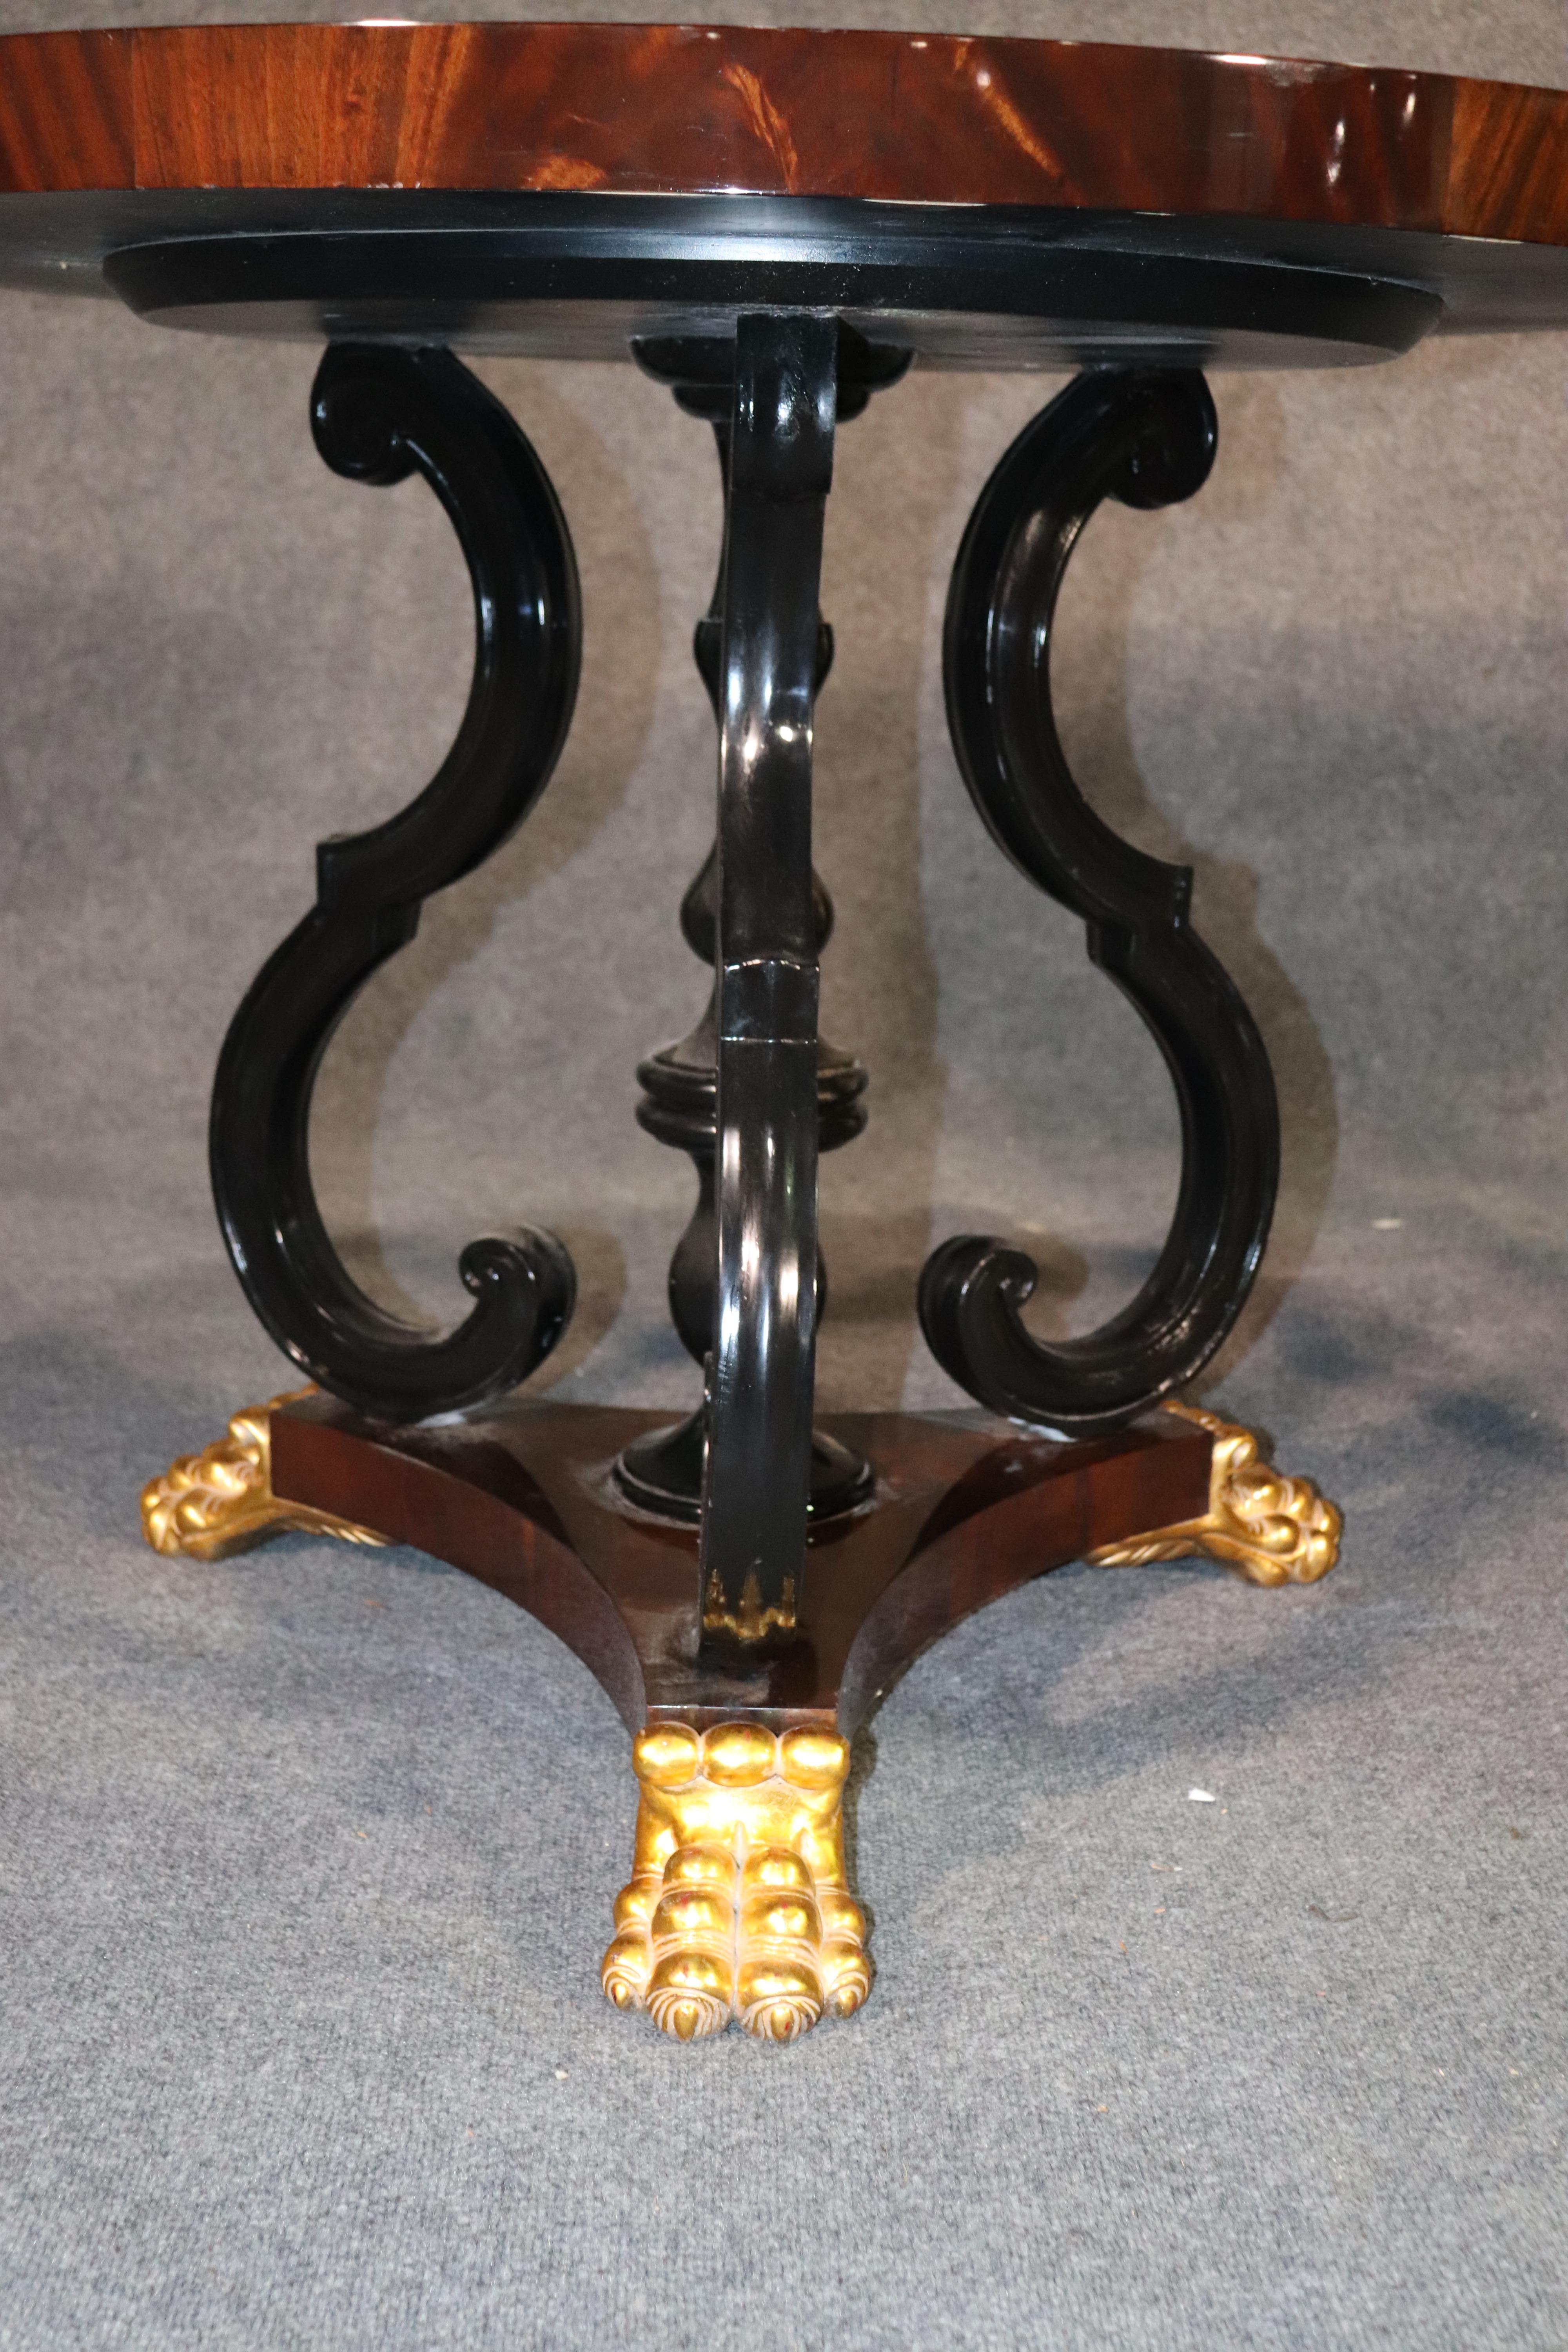 This is a beautiful pair of ebonized and genuine gold leafed tables. The tables are designed in the English Regency manner and have flame mahogany tops and black lacquered bases. They have very rich looking gilded paw feet and are rather large. The